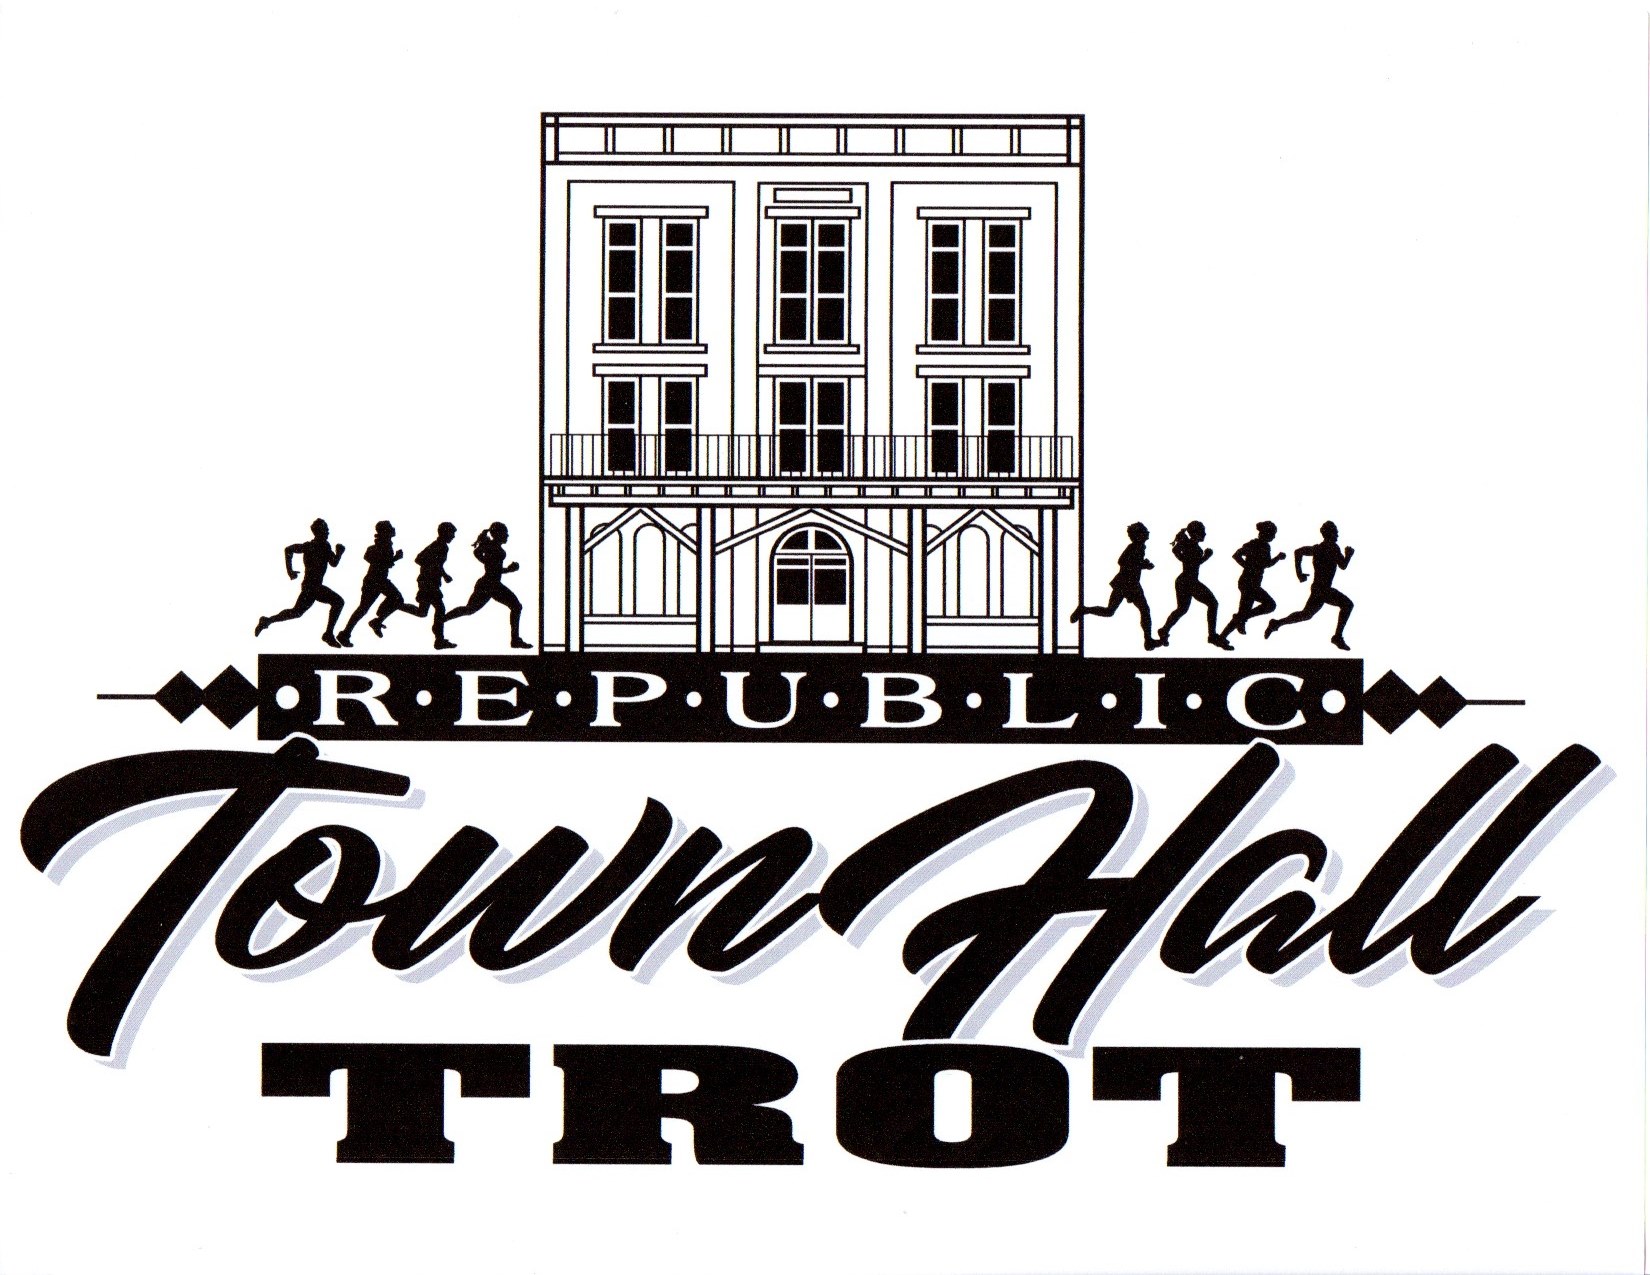 Republic Town Hall Trot logo on RaceRaves